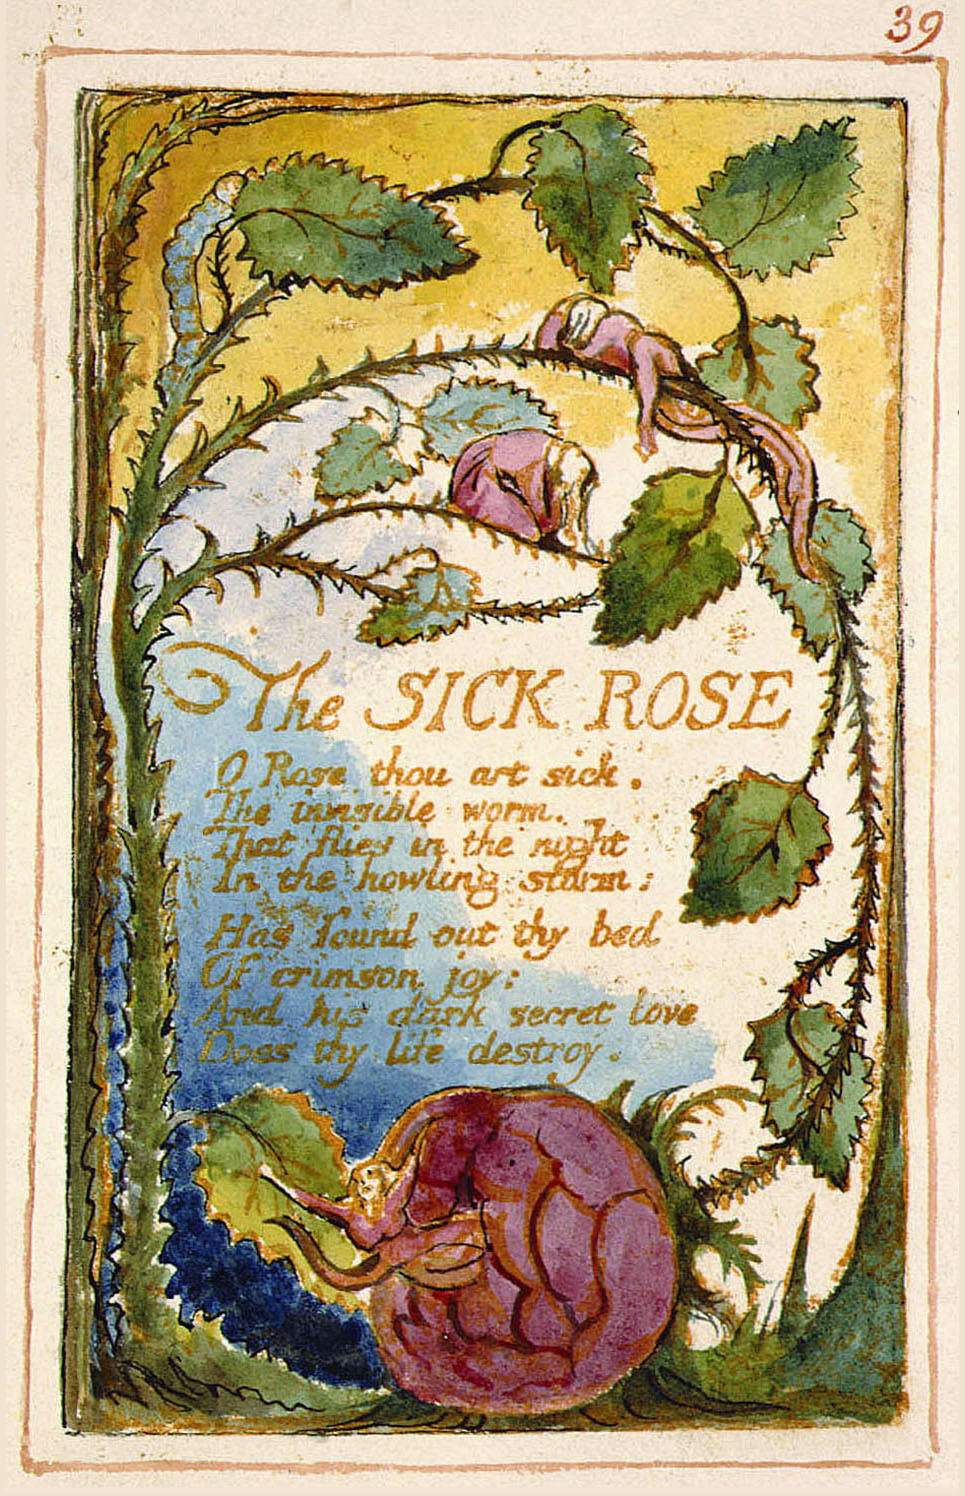 "The Sick Rose," a poem from Songs of Innocence and Experience by William Blake.